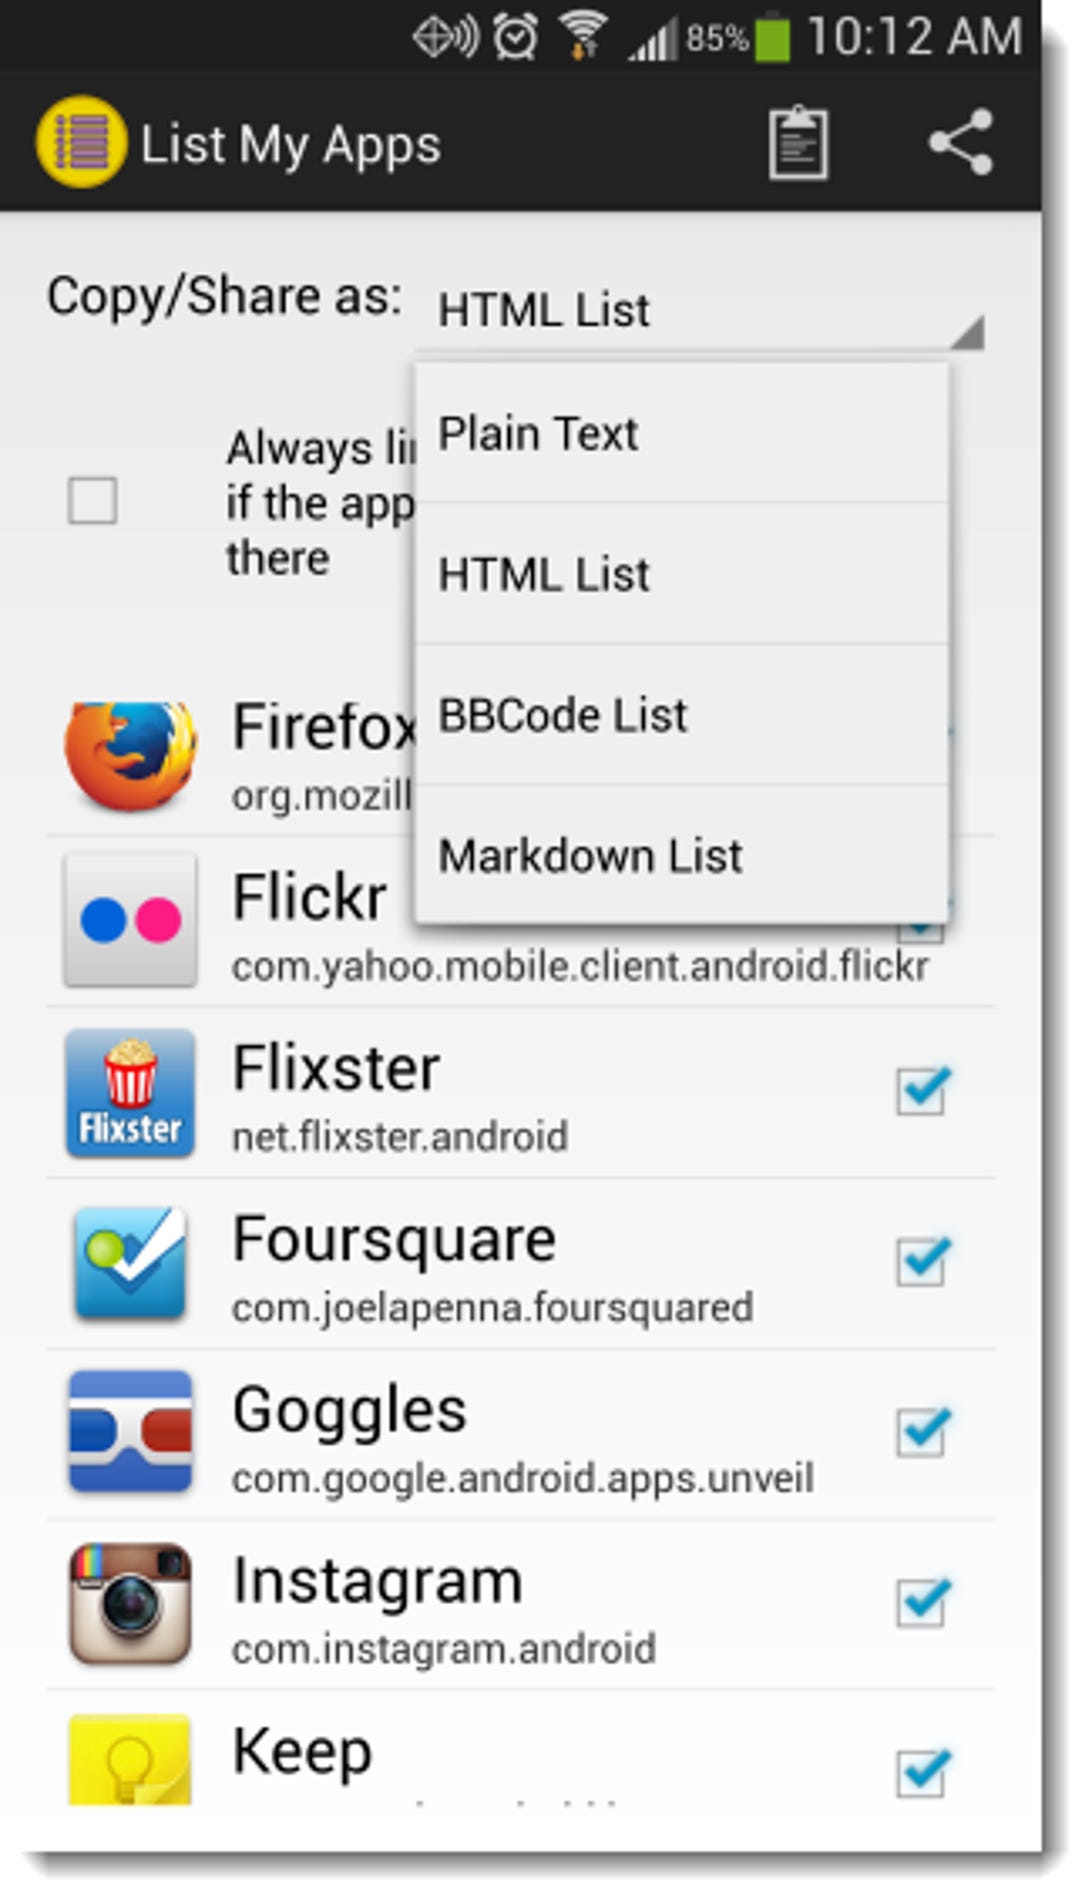 List My Apps for Android